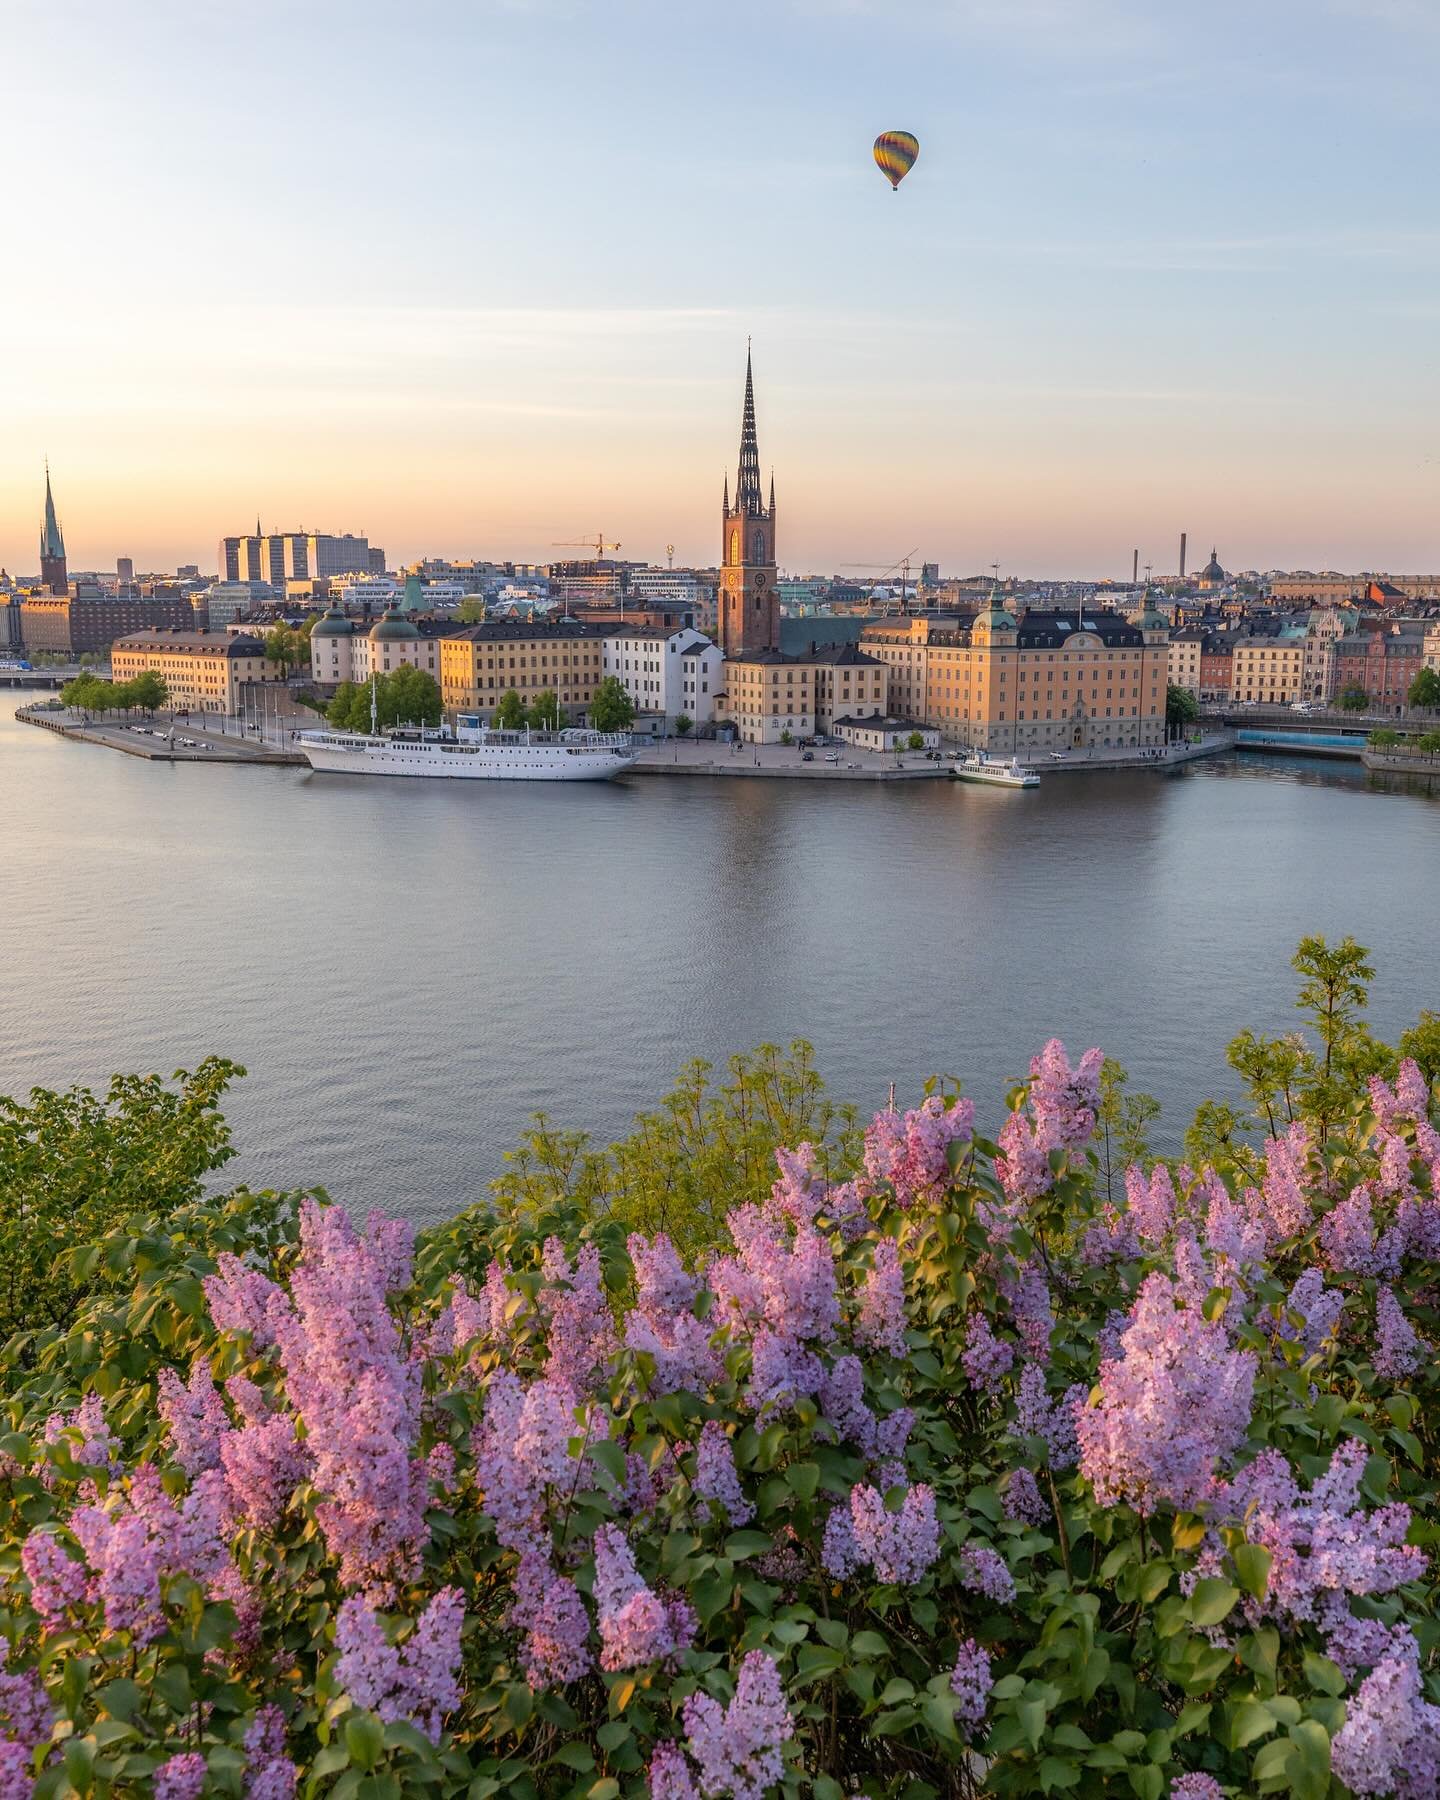 Summers in Stockholm are truly something special - the colors of nature are exploding, the days are getting longer and the sun is warming up mood and mind ☀️.
Are you planning to visit Stockholm this summer?
.
.
.
#stockholm #sthlm #visitstockholm #s